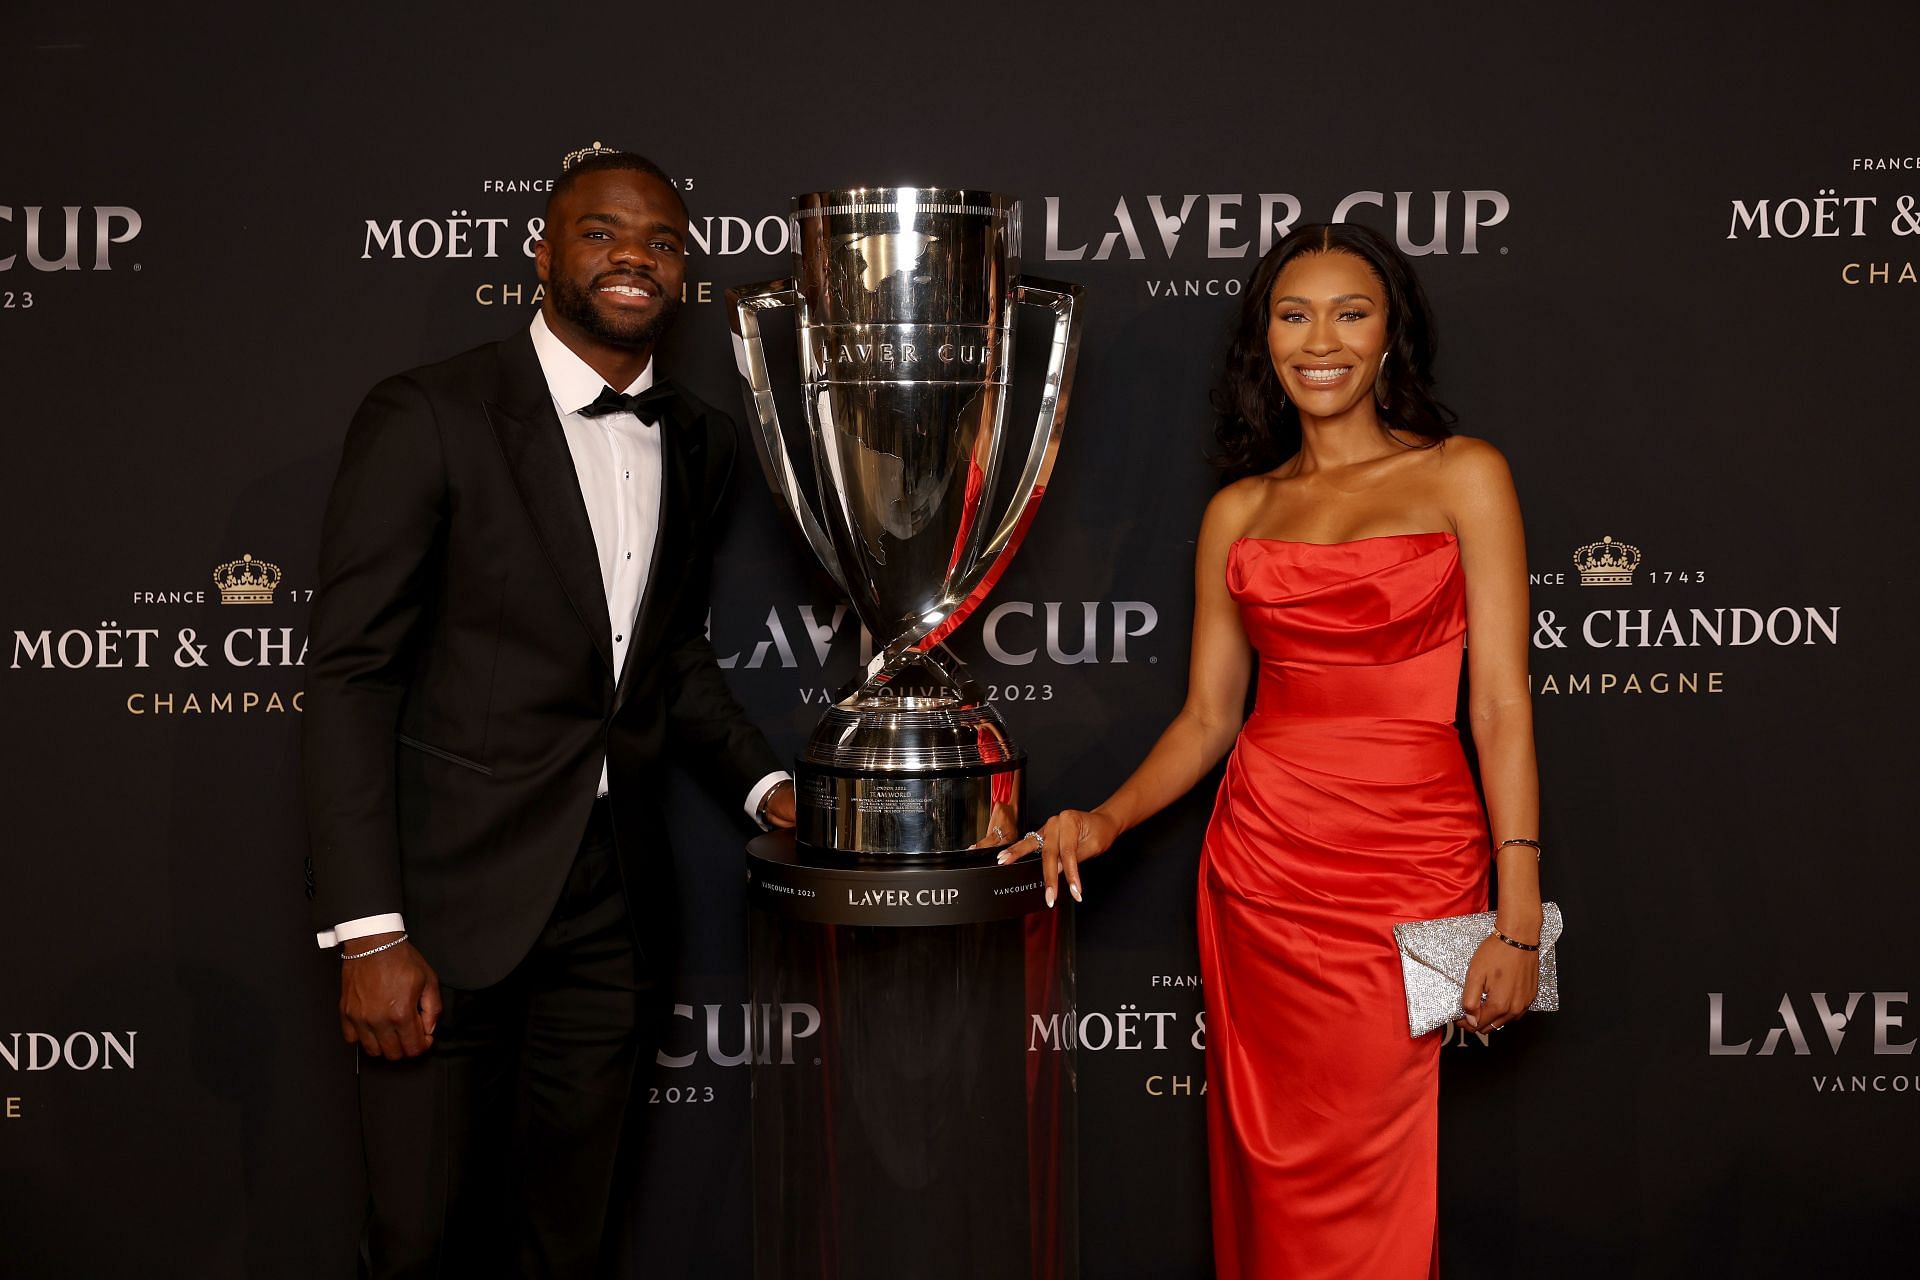 Frances Tiafoe (L) and Ayan Broomfield (R) posing with the 2023 Laver Cup trophy